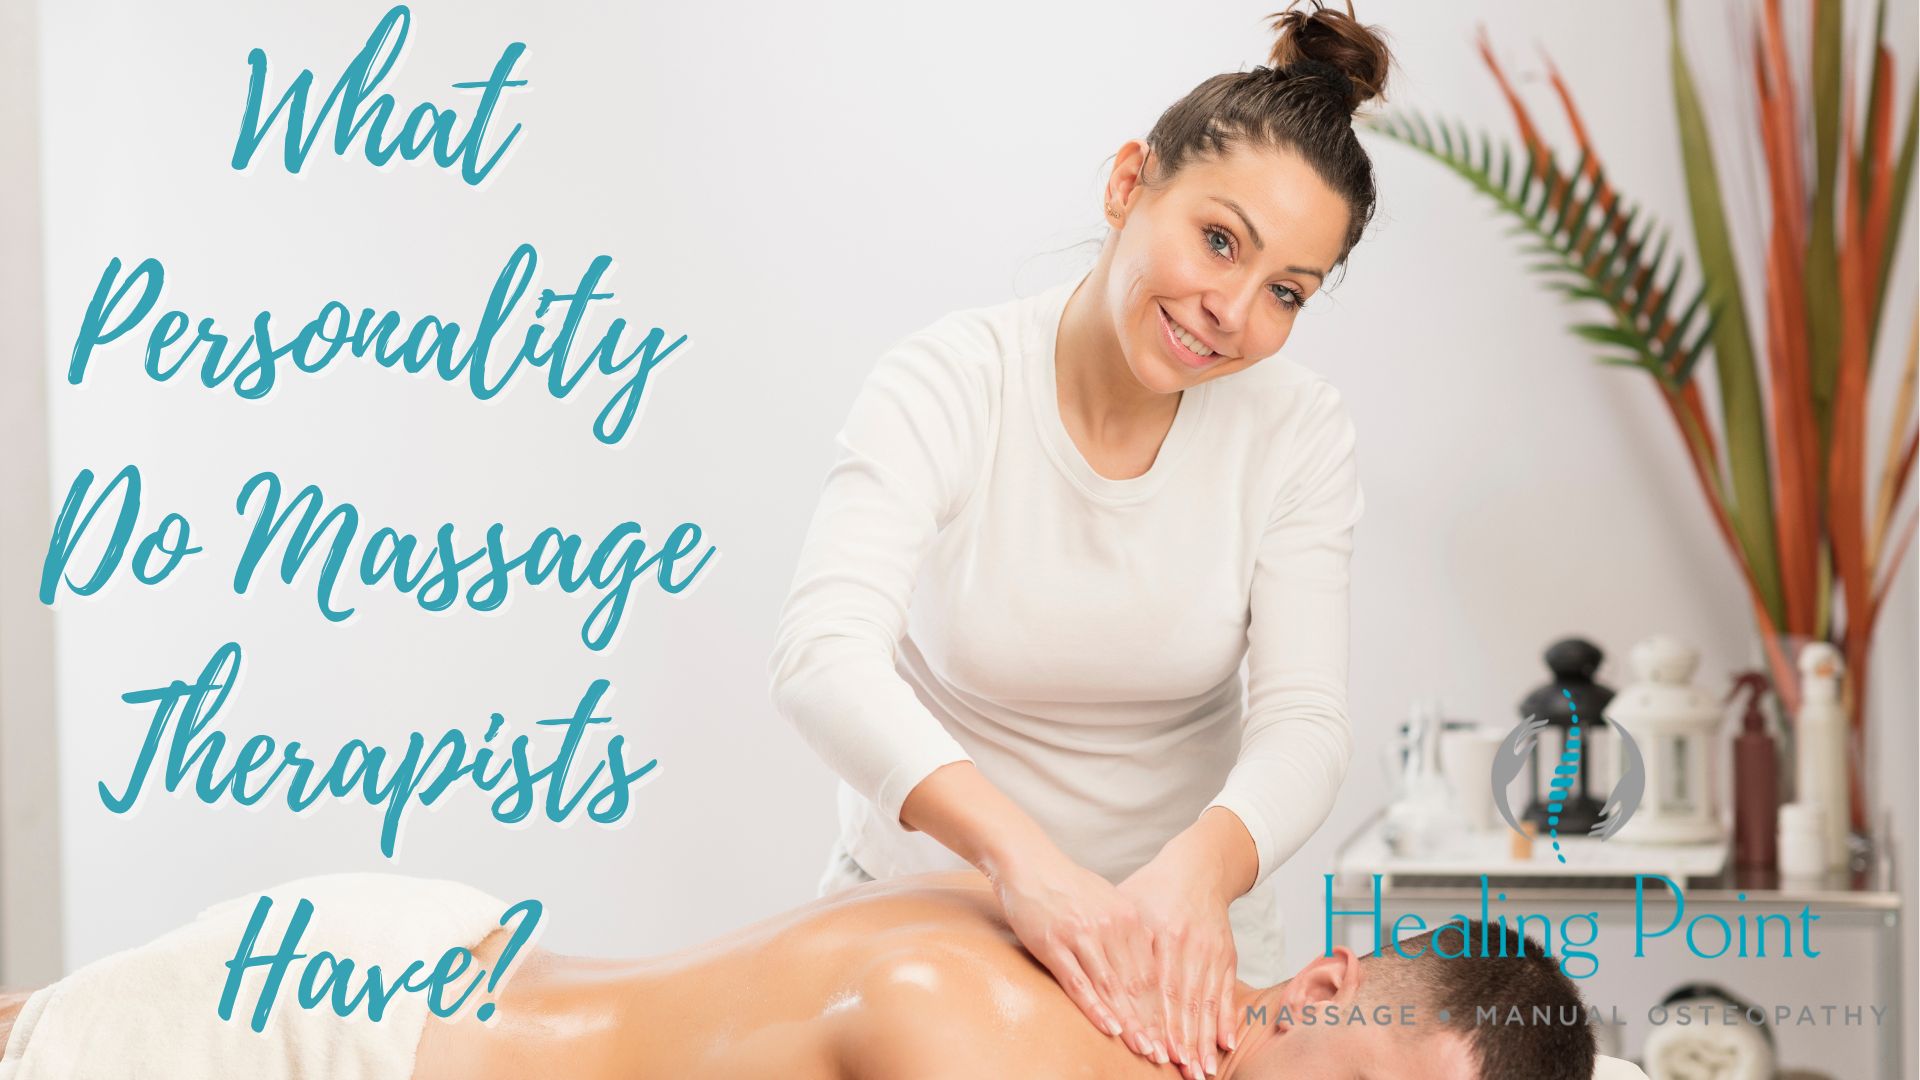 What Personality Do Massage Therapists Have In St. Albert?